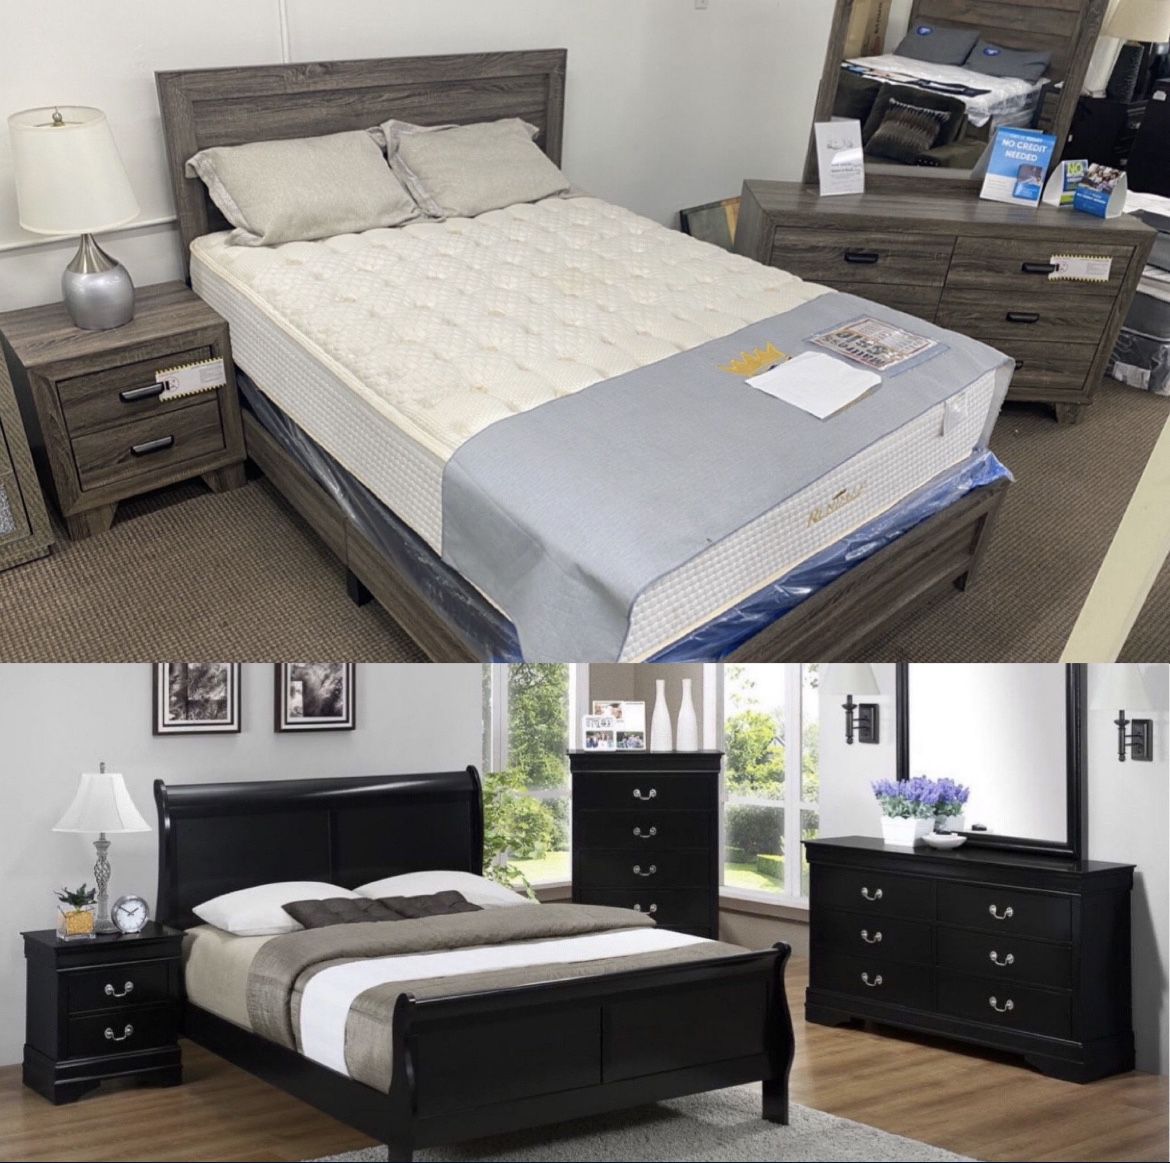 💤 NEW!! I 4pc Bedroom Sets QUEEN KING FULL TWIN STILL IN BOX!📦😴 🚚Delivery Available  